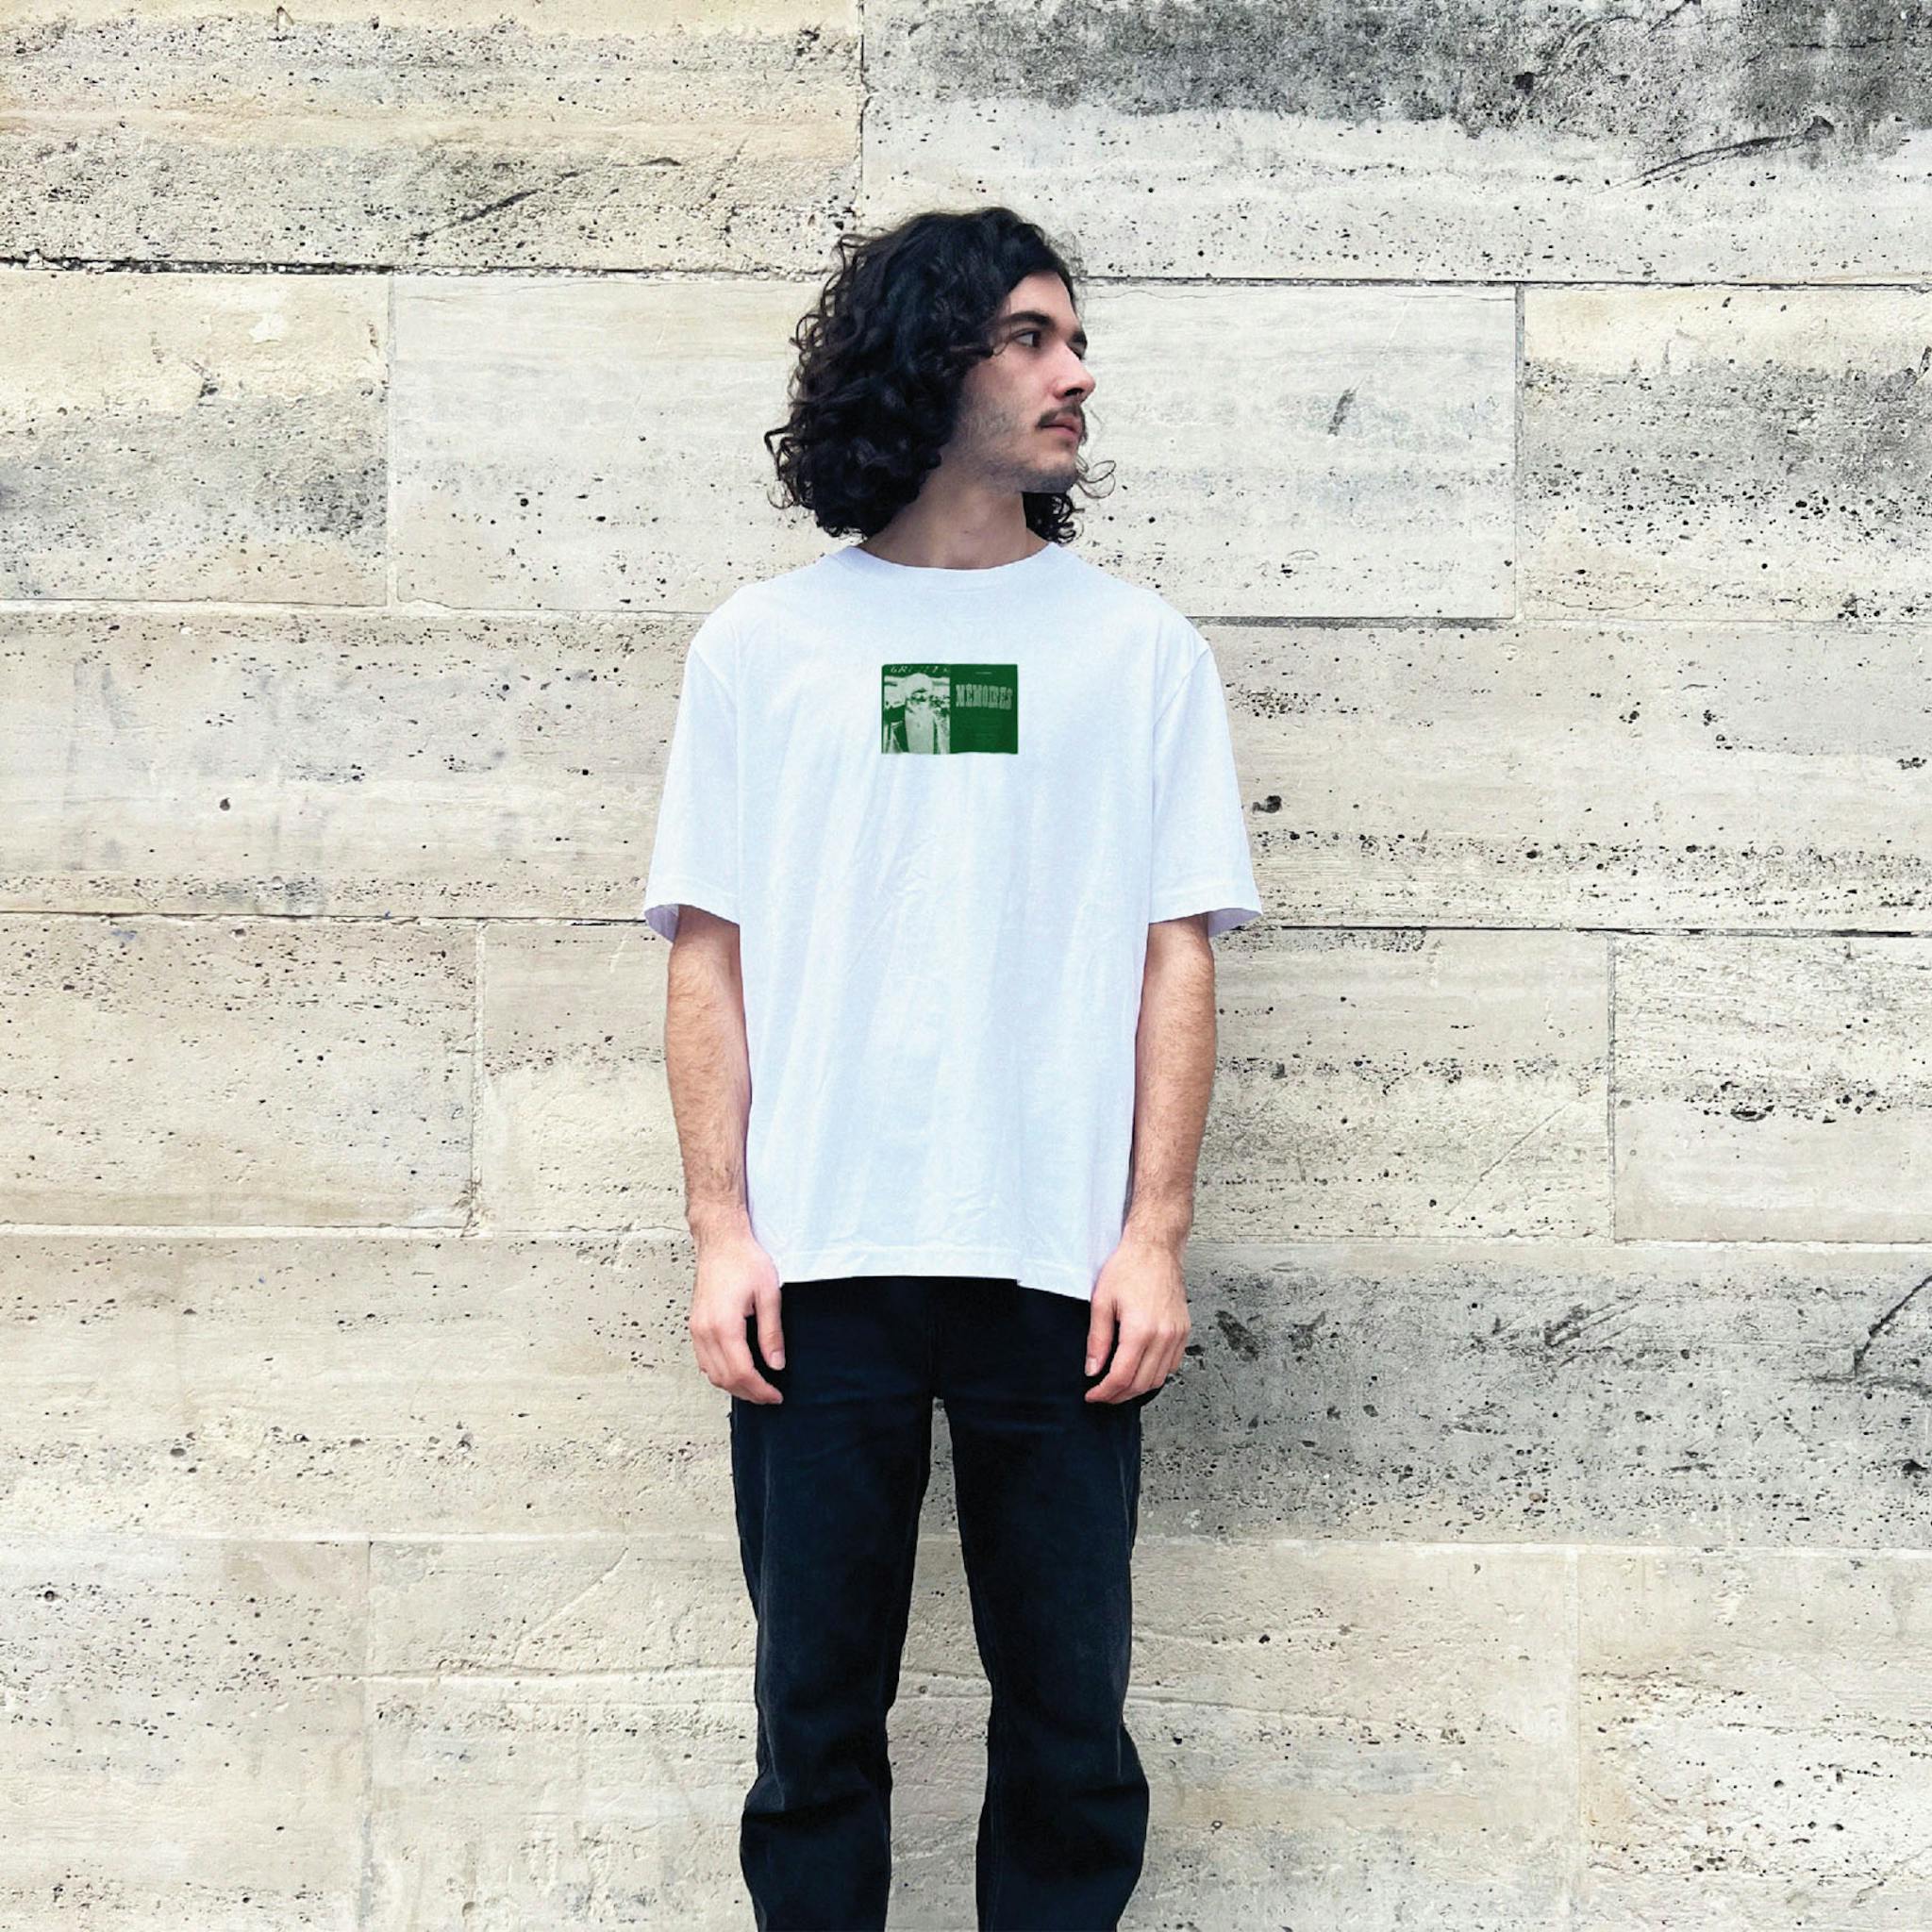 A man with long dark hair wearing a white t-shirt with a green rectangular graphic and text on the front.